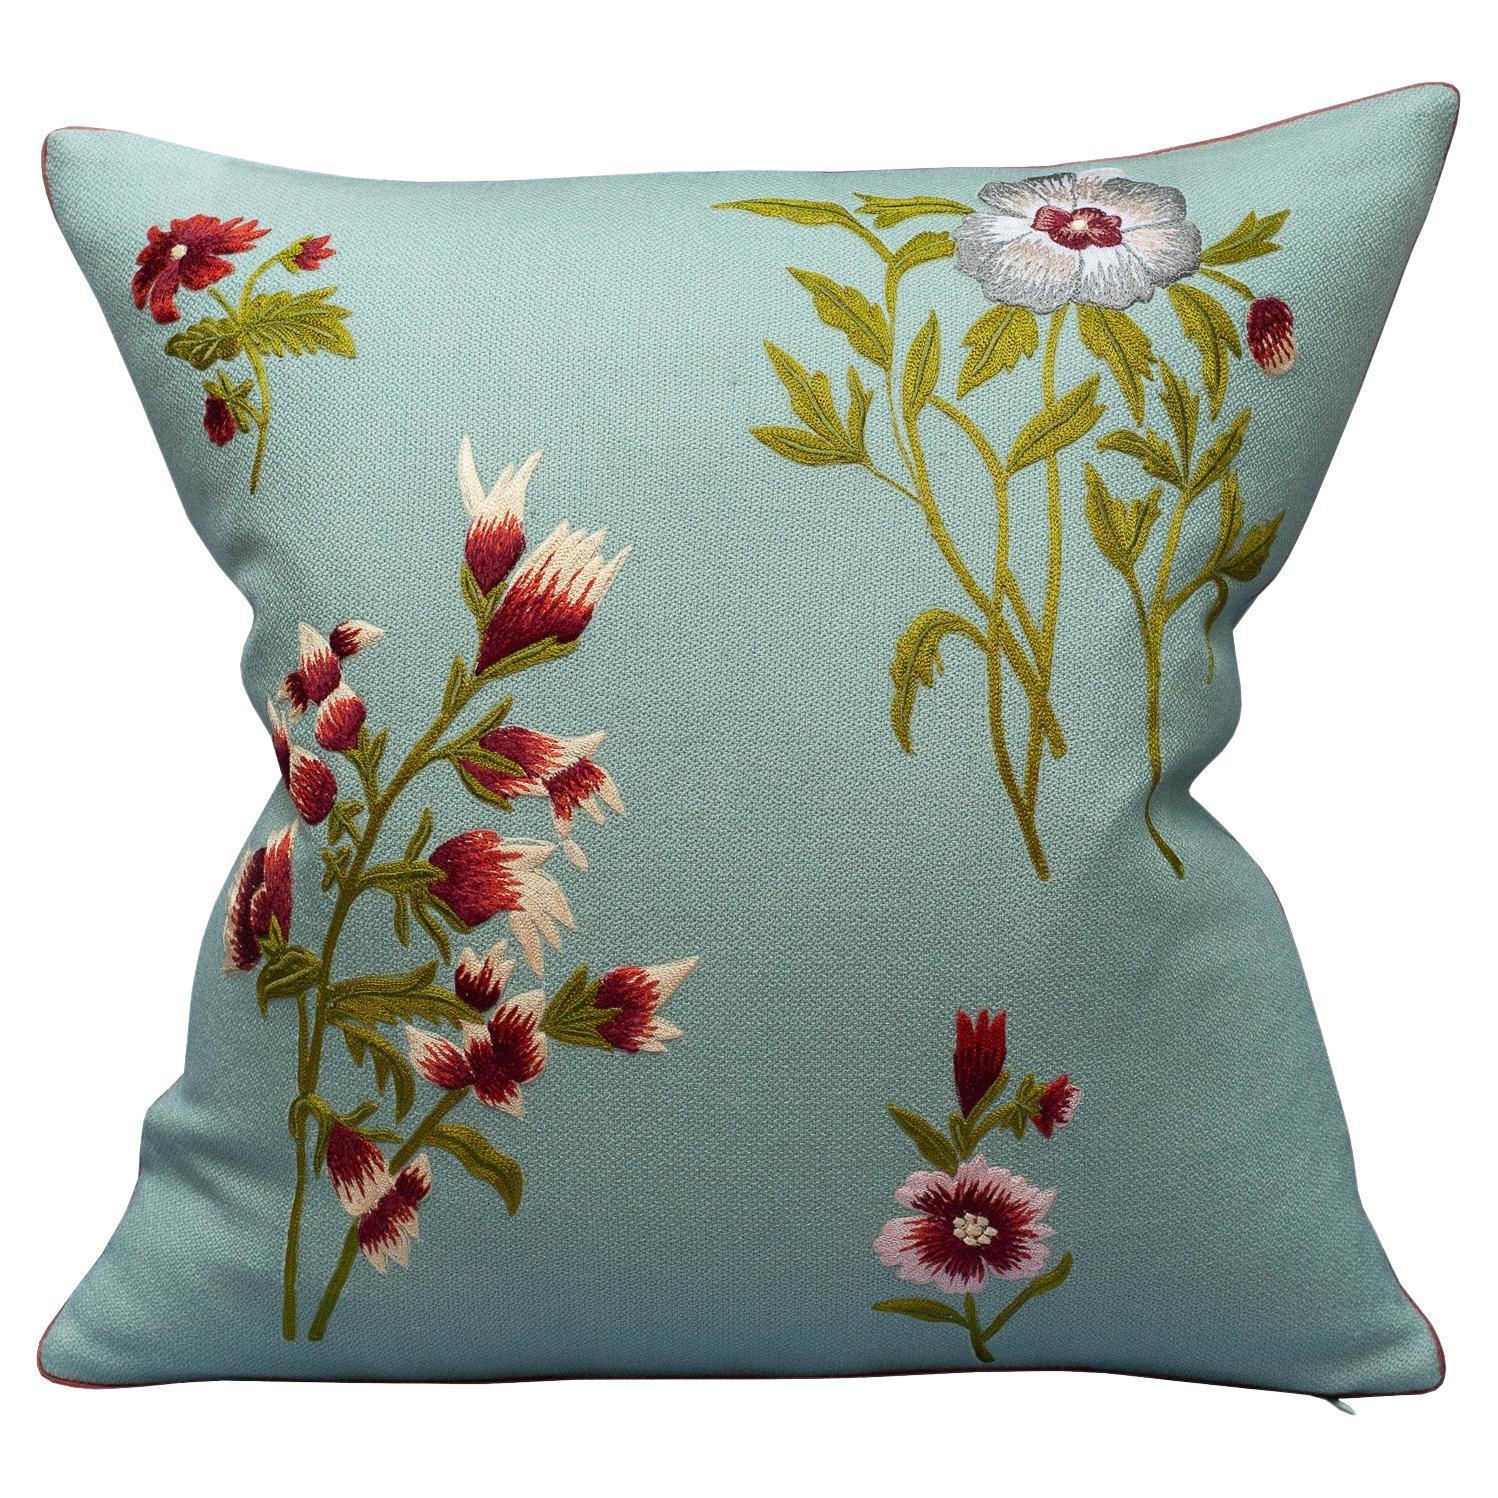 Contemporary Soft Blue Merino Wool and Linen Pillow with Embroidered Florals For Sale